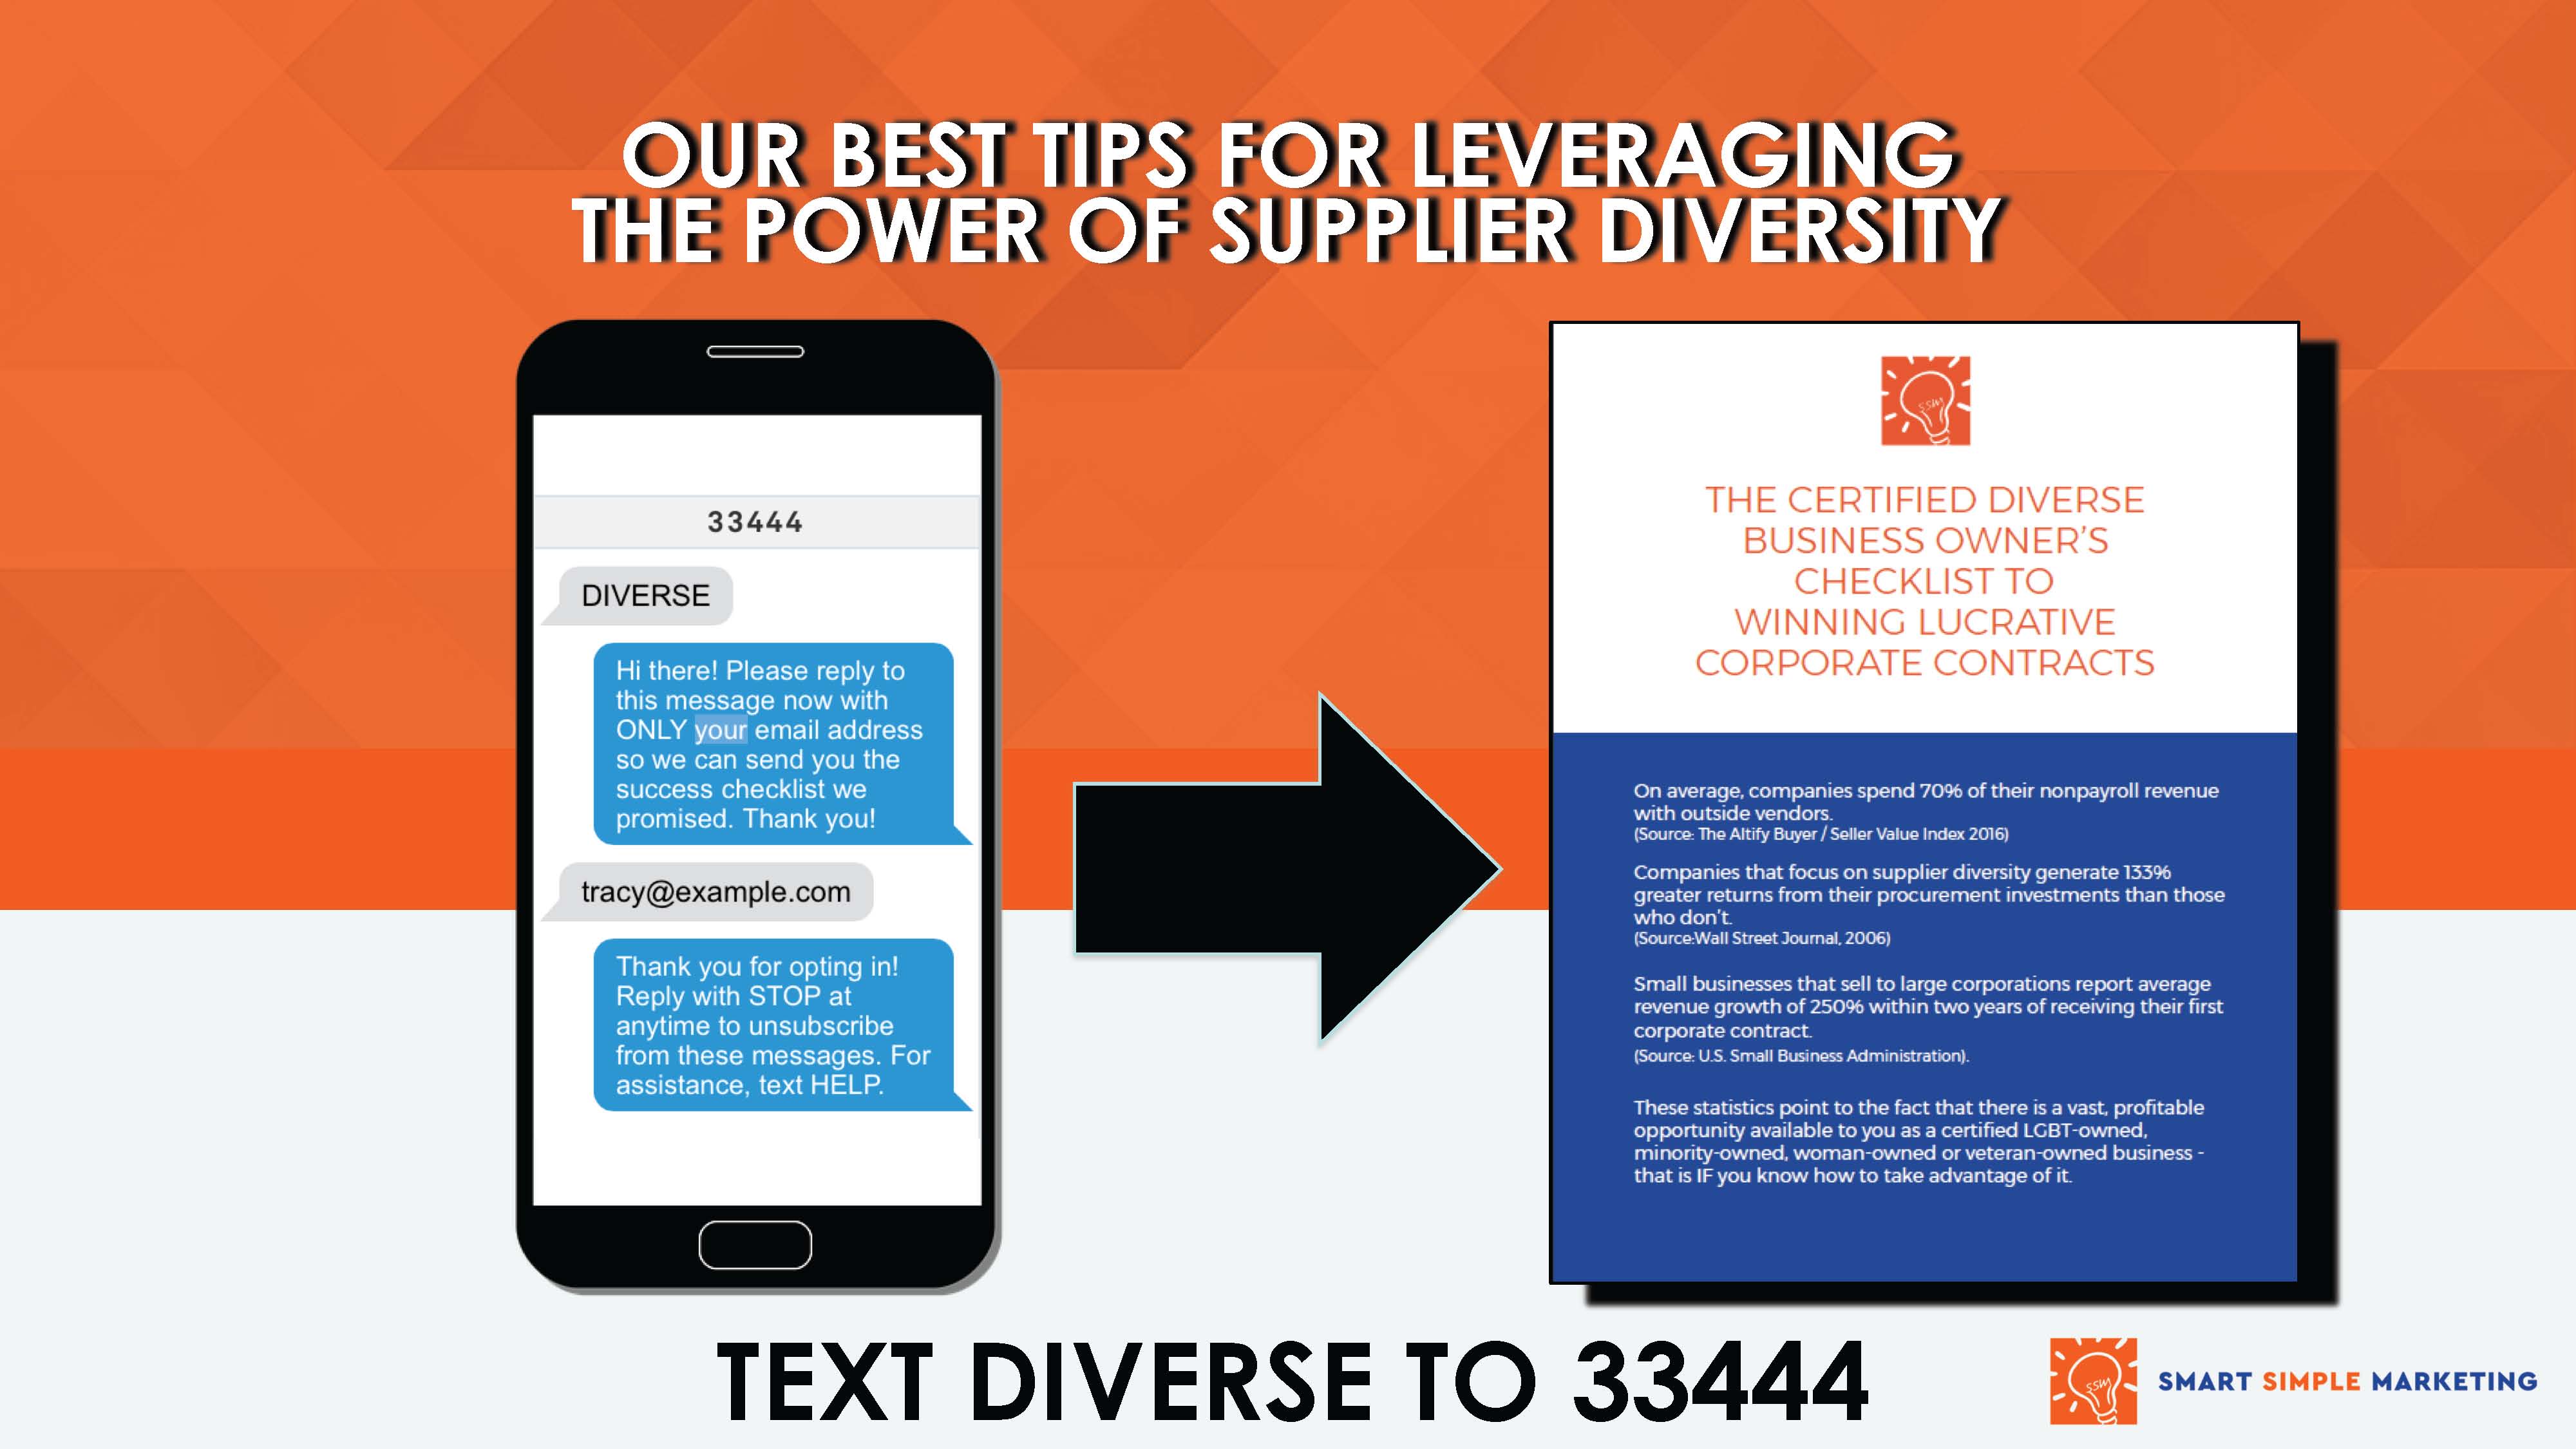 Download our best tips for leveraging supplier diversity